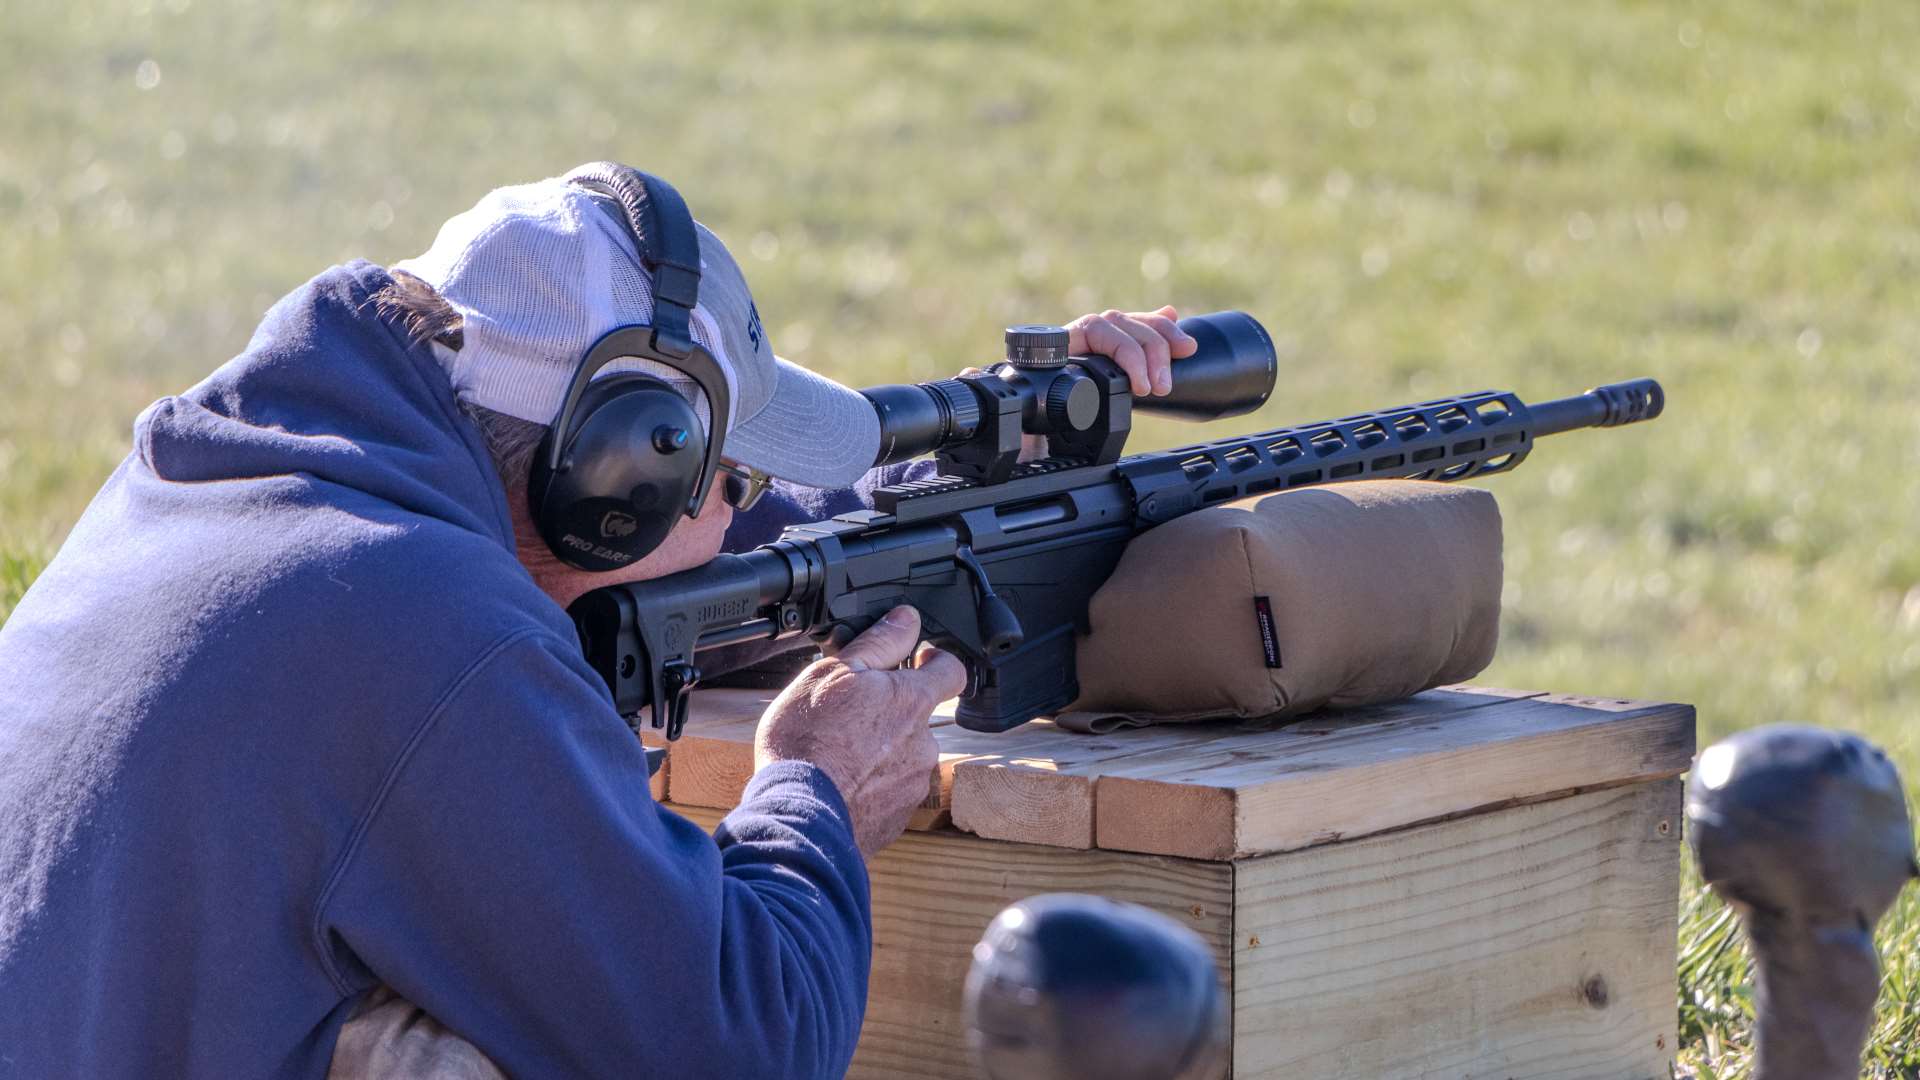 Stage 10: Precision Rifle Series